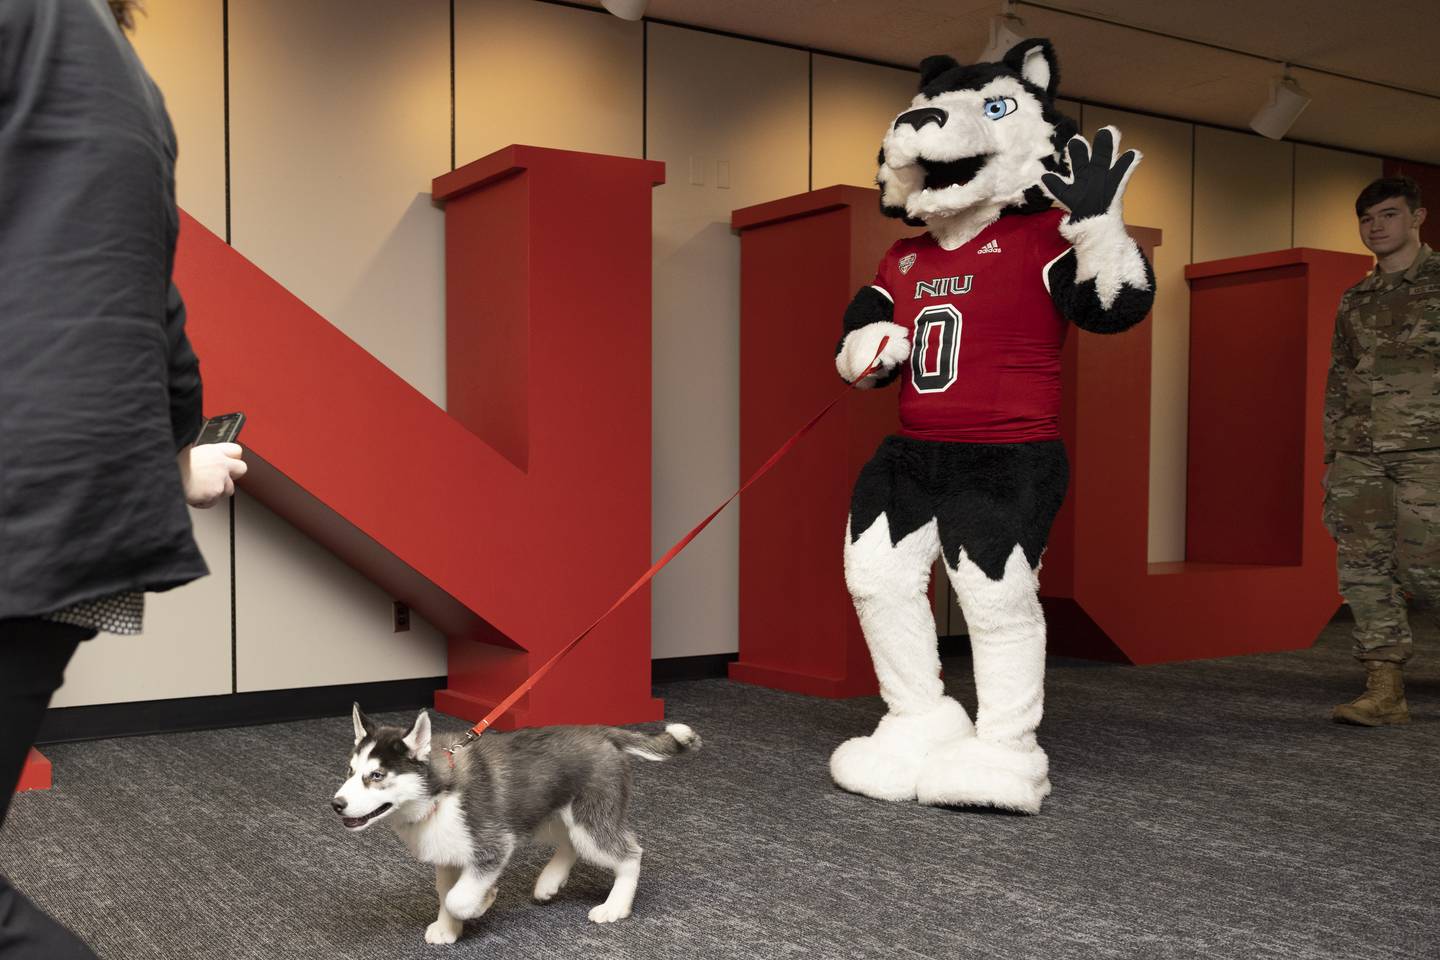 Mission III enters his introduction, Friday, Jan. 27, 2023, along with Victore E. Huskie at Northern Illinois University. (Photo provided by Northern Illinois University)